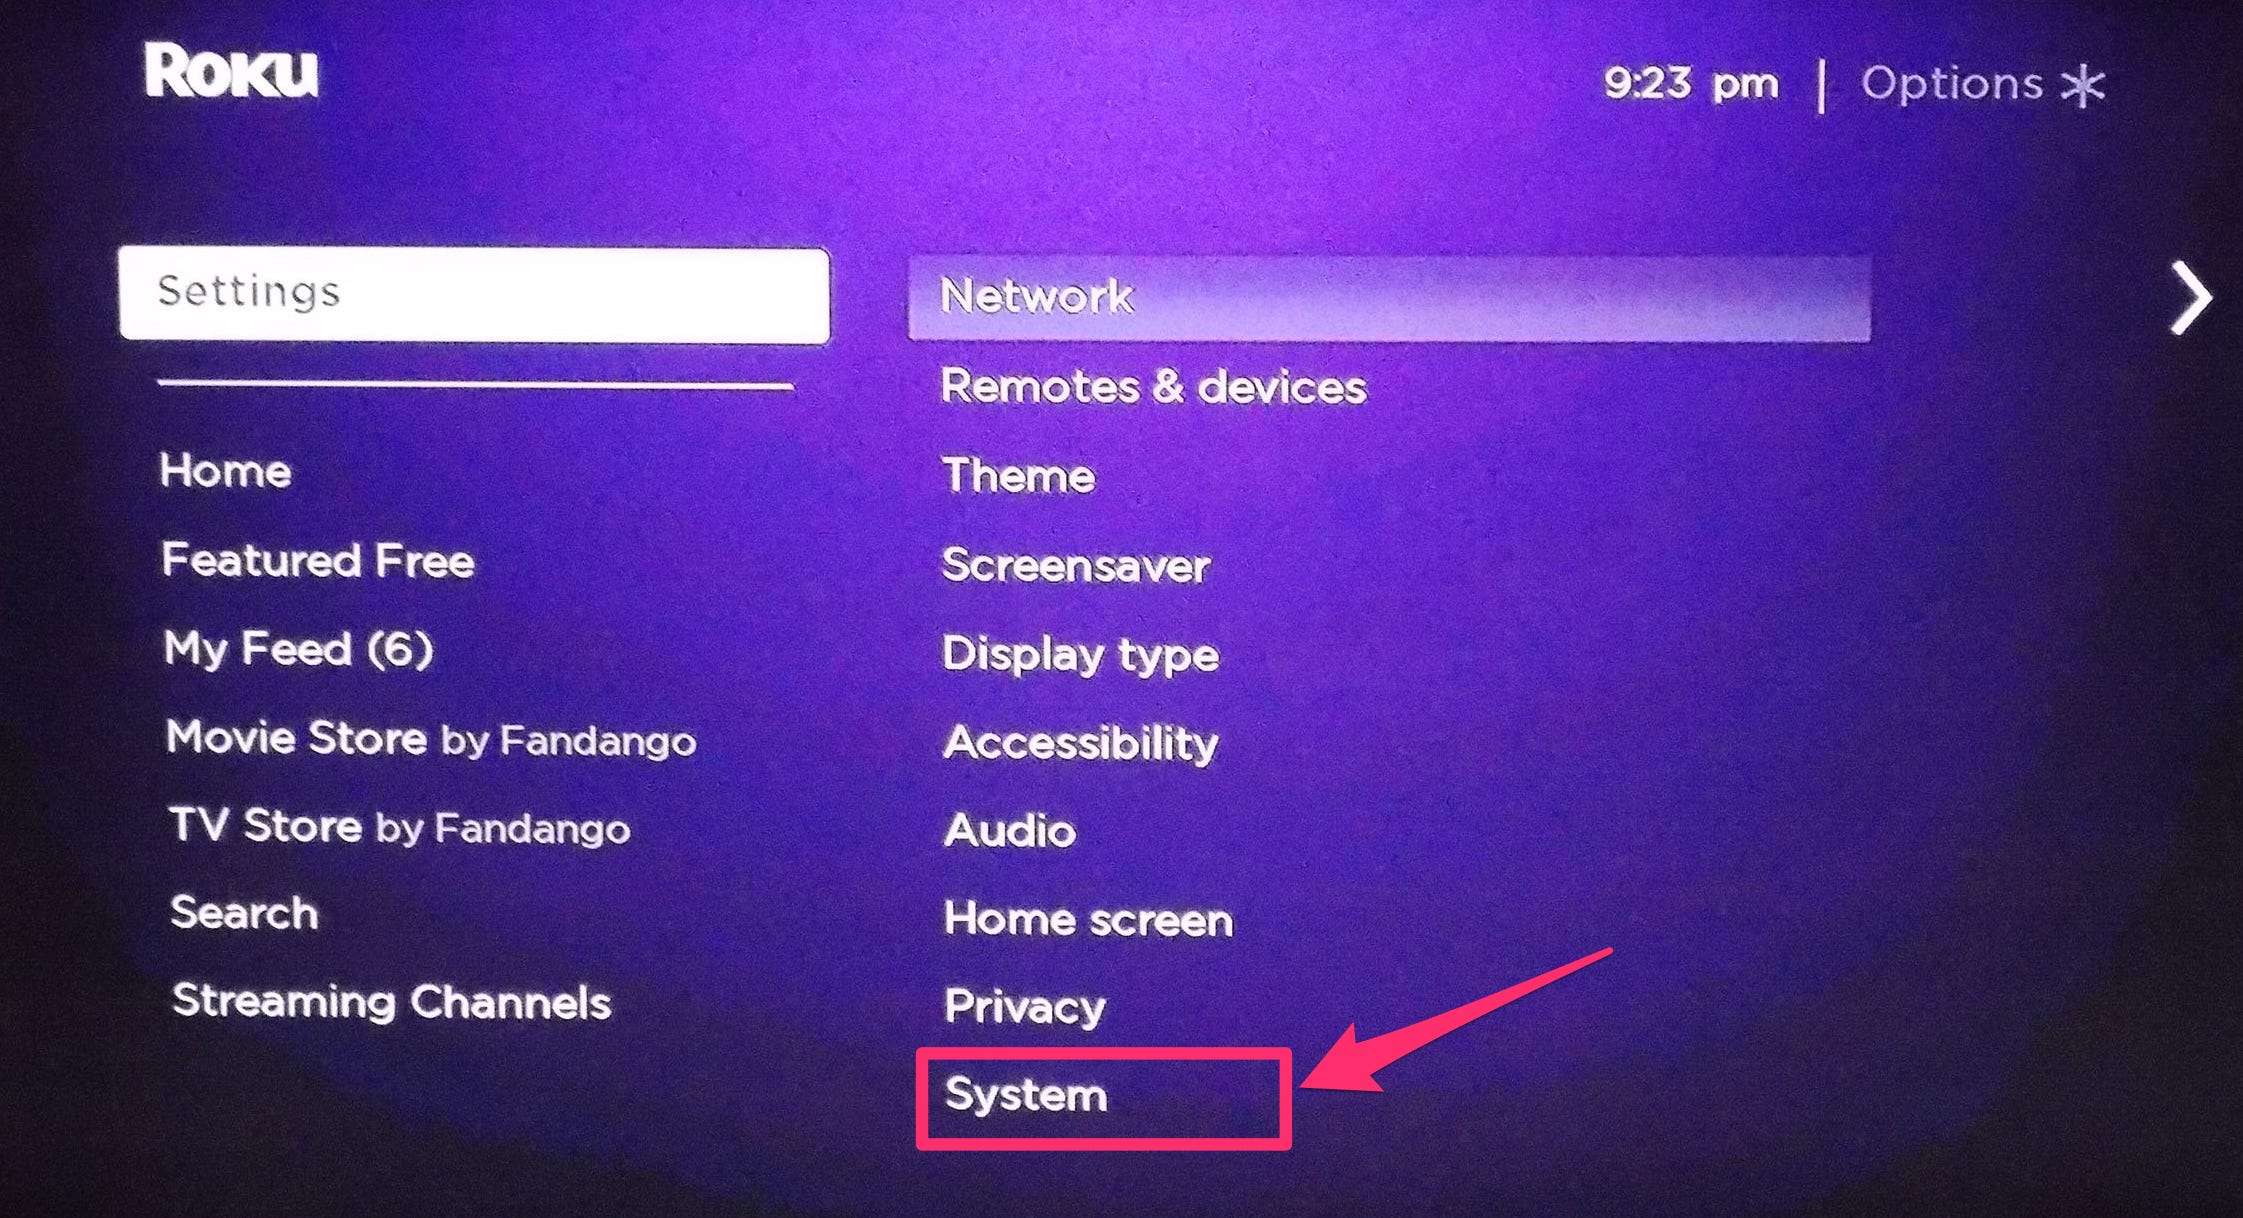 Navigate to the Roku home screen and access the "Settings" menu.
Select "System" and then choose "System restart" to reboot your Roku device.